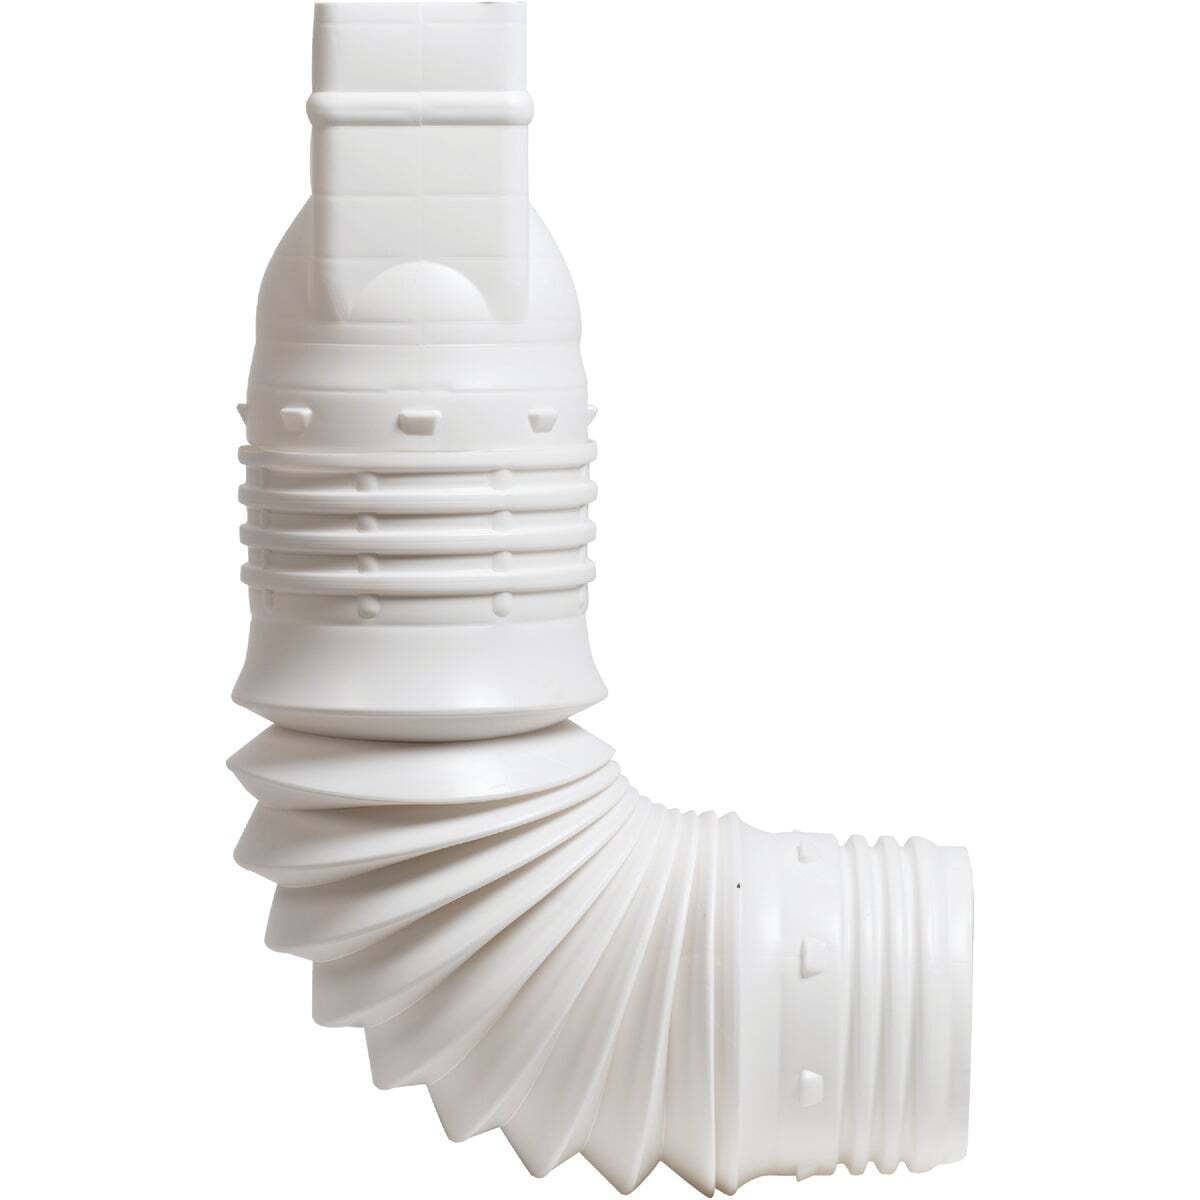 Amerimax Flex-a-spout 3 In. X 4 In. X 3 In. Or 4 In. Downspout Adapter Adp53129